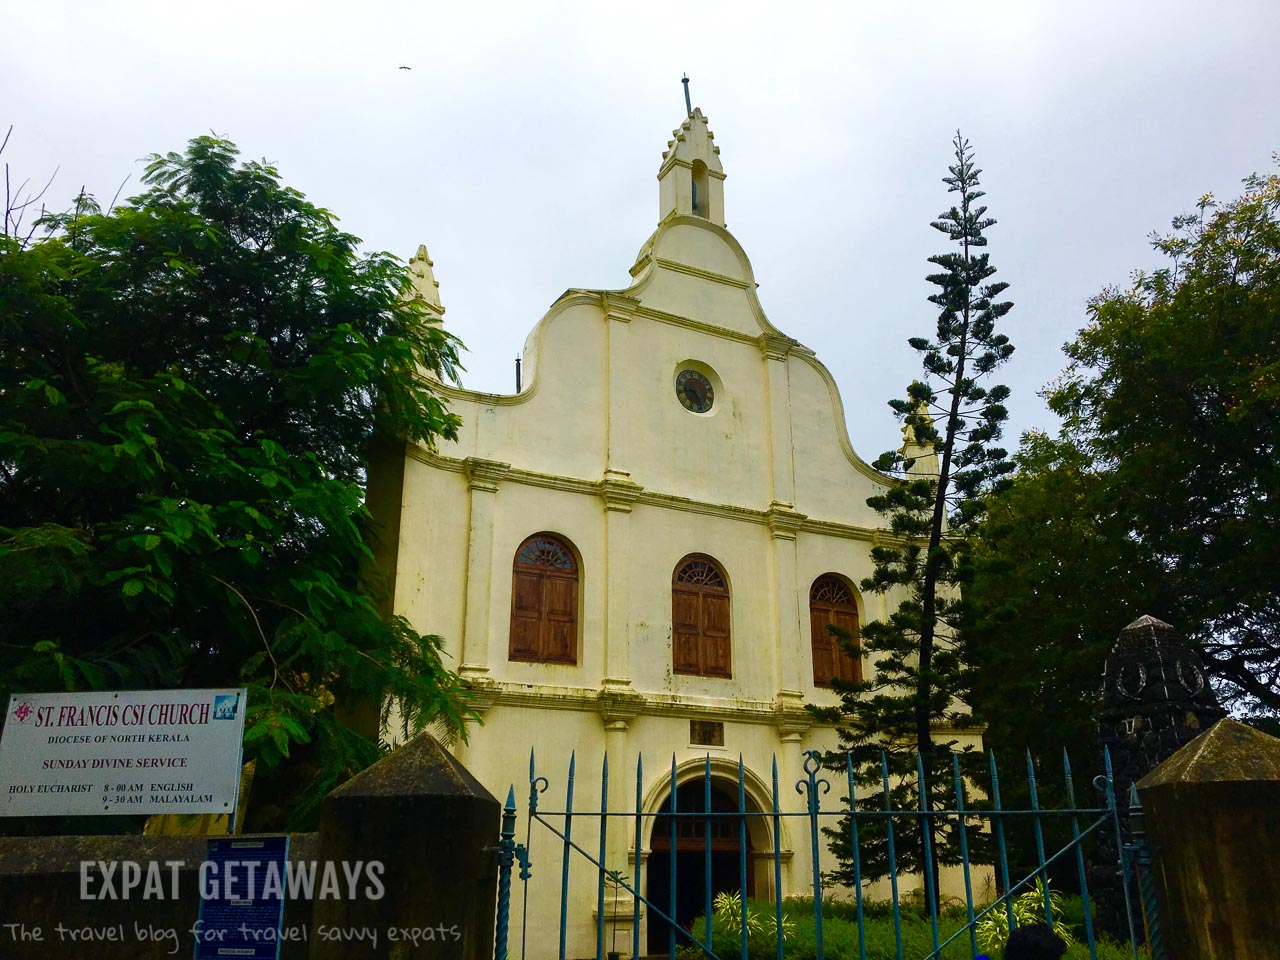 The St Francis Church was built by the Portuguese in 1503. Expat Getaways - One Week in Kerala, India.